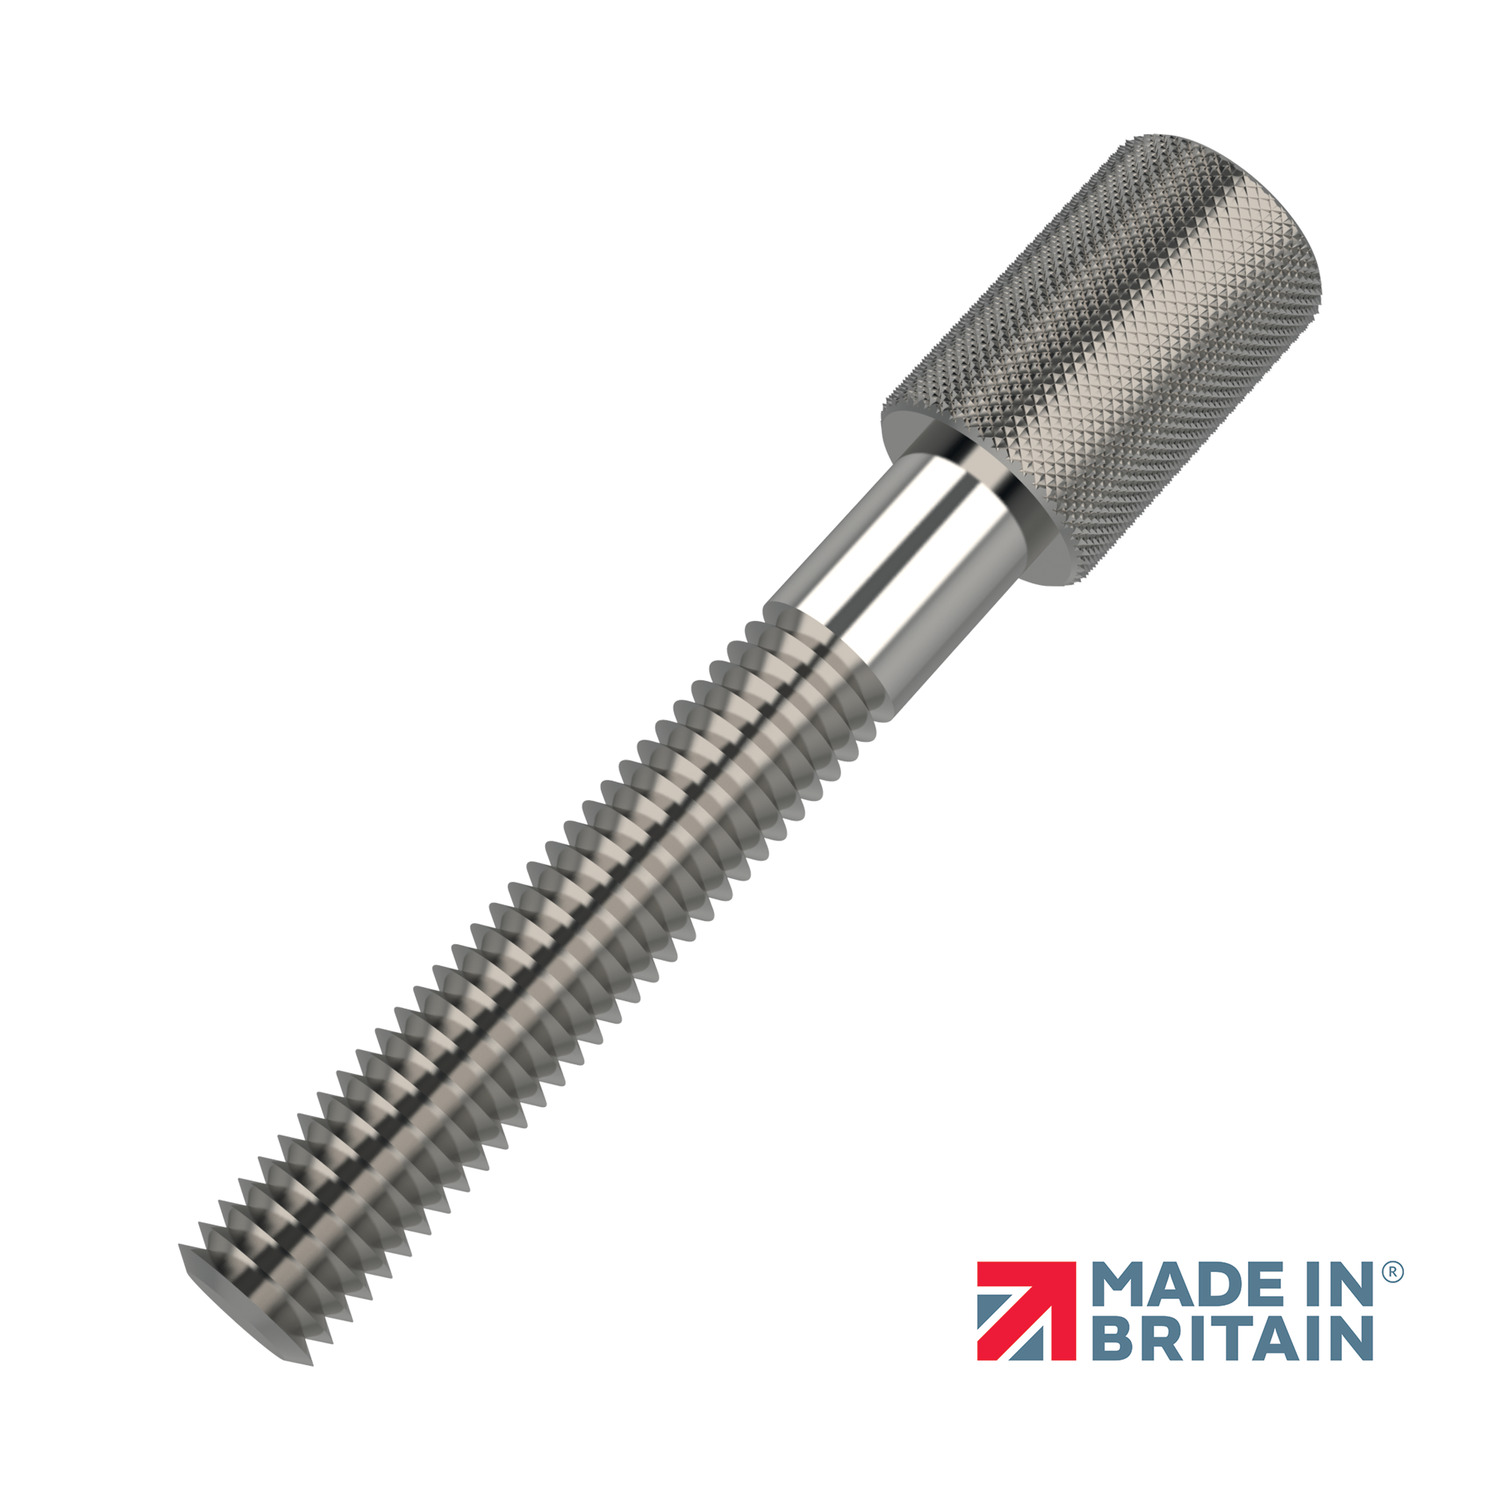 P0435.03-08-12-A2 Thin head thumb screw - M 3x12 Stainless steel 303